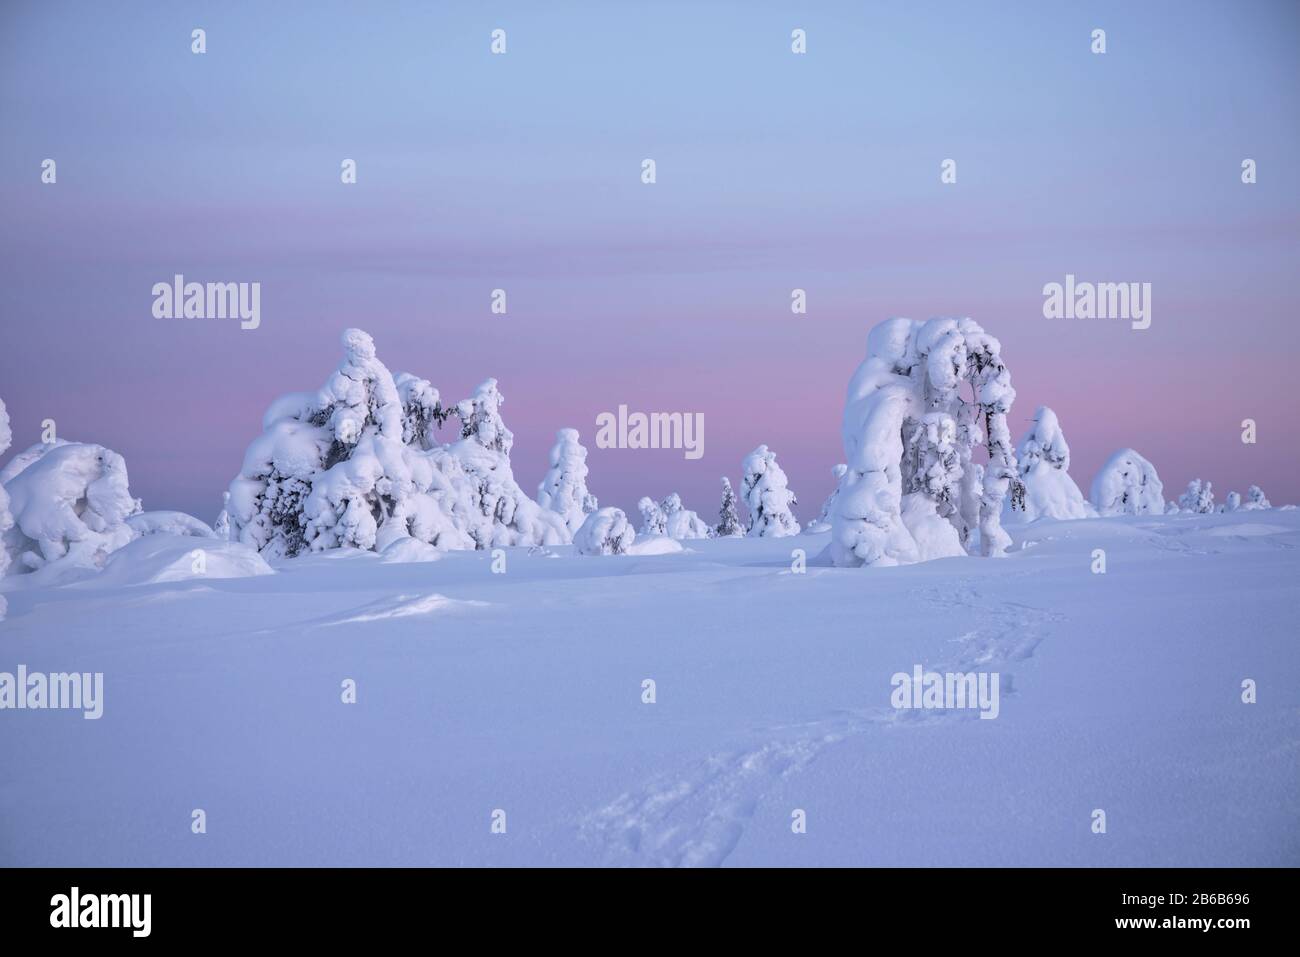 Snow covered trees in Lapland, Finland create a wonderful and beautiful winter wonderland landscape during sunset. They're called popcorn trees. Stock Photo